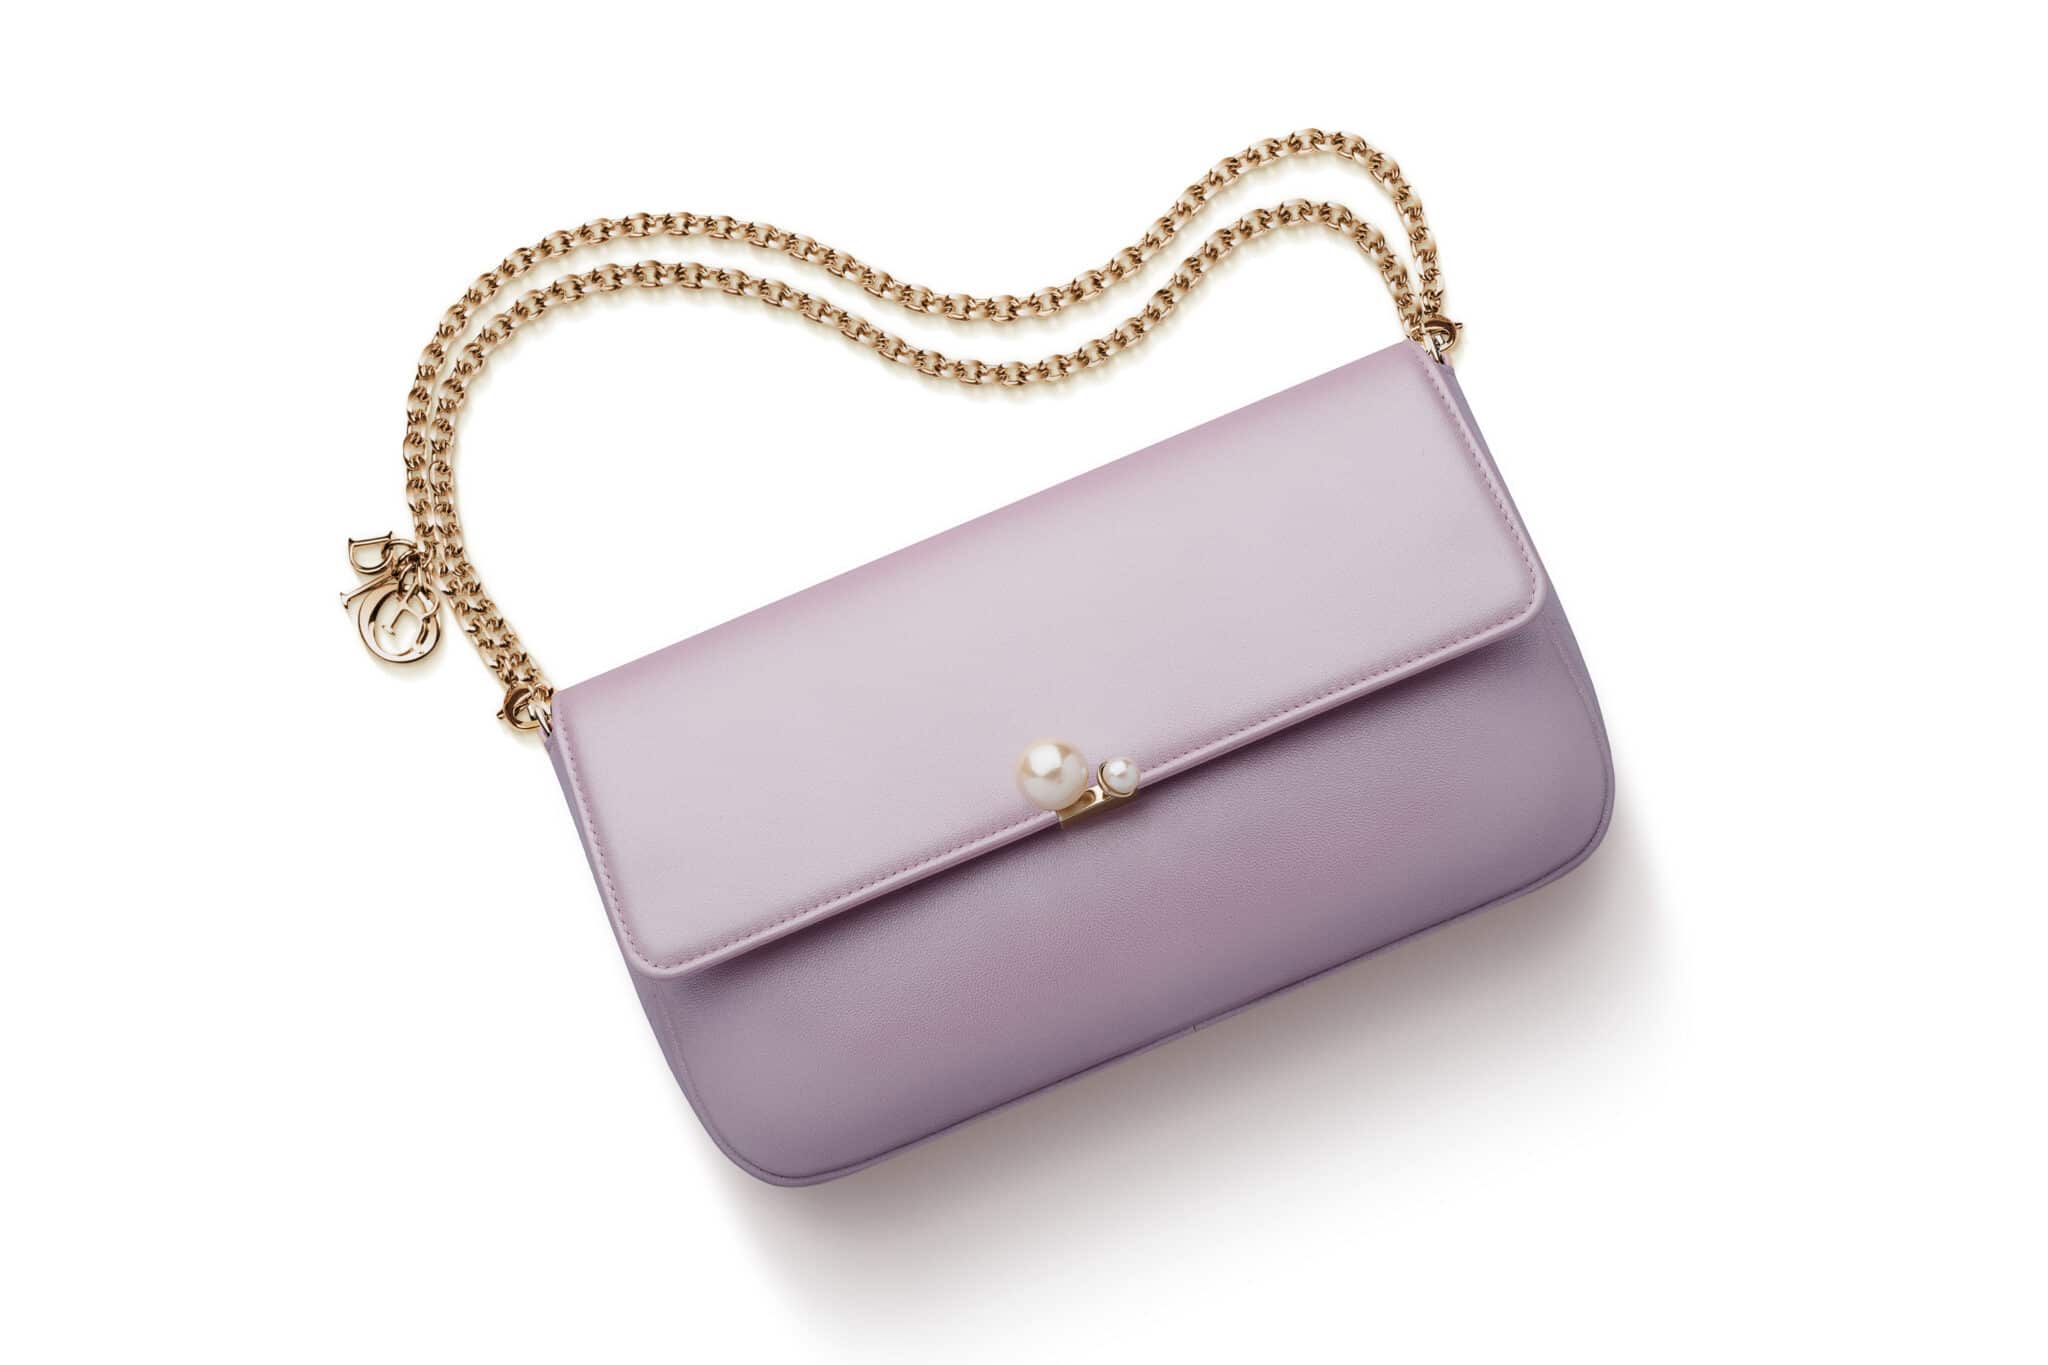 Dior Tribale Pearl Promenade Pouch Bag Reference Guide - Spotted Fashion